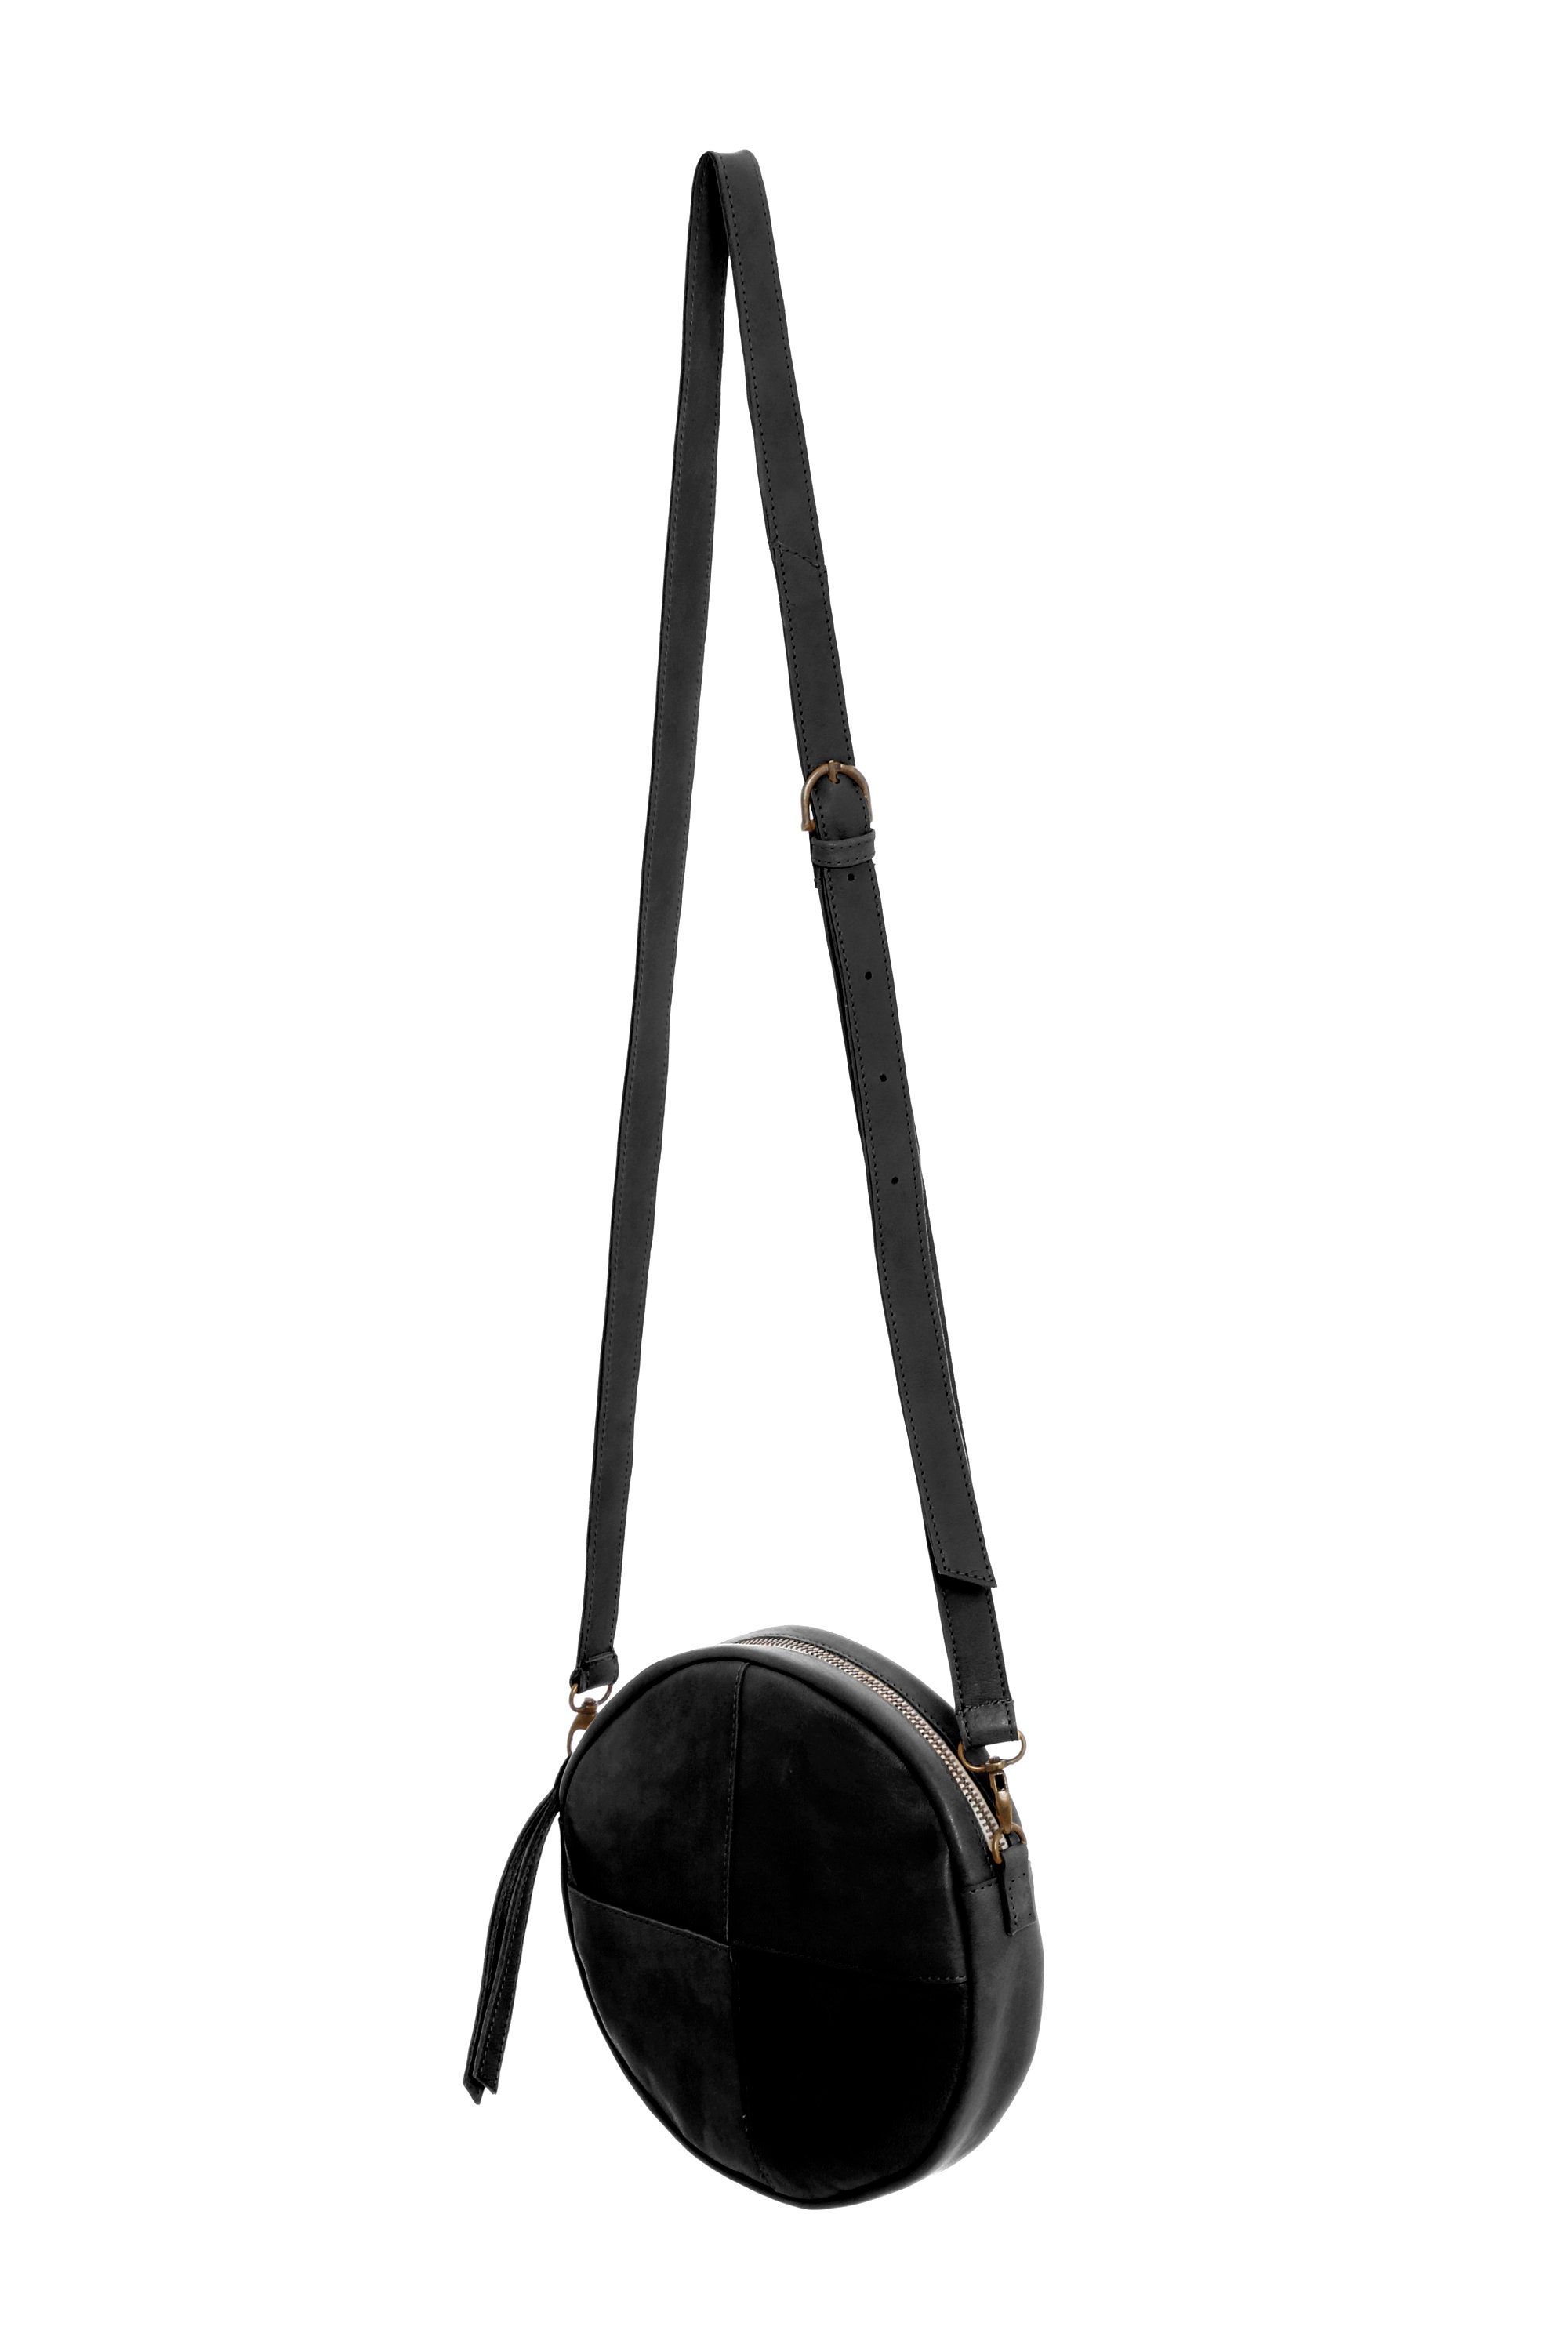 Clare V black leather round shoulder bag, Circle Distressed purse with top  handle, Petit Alistair Circle Bag